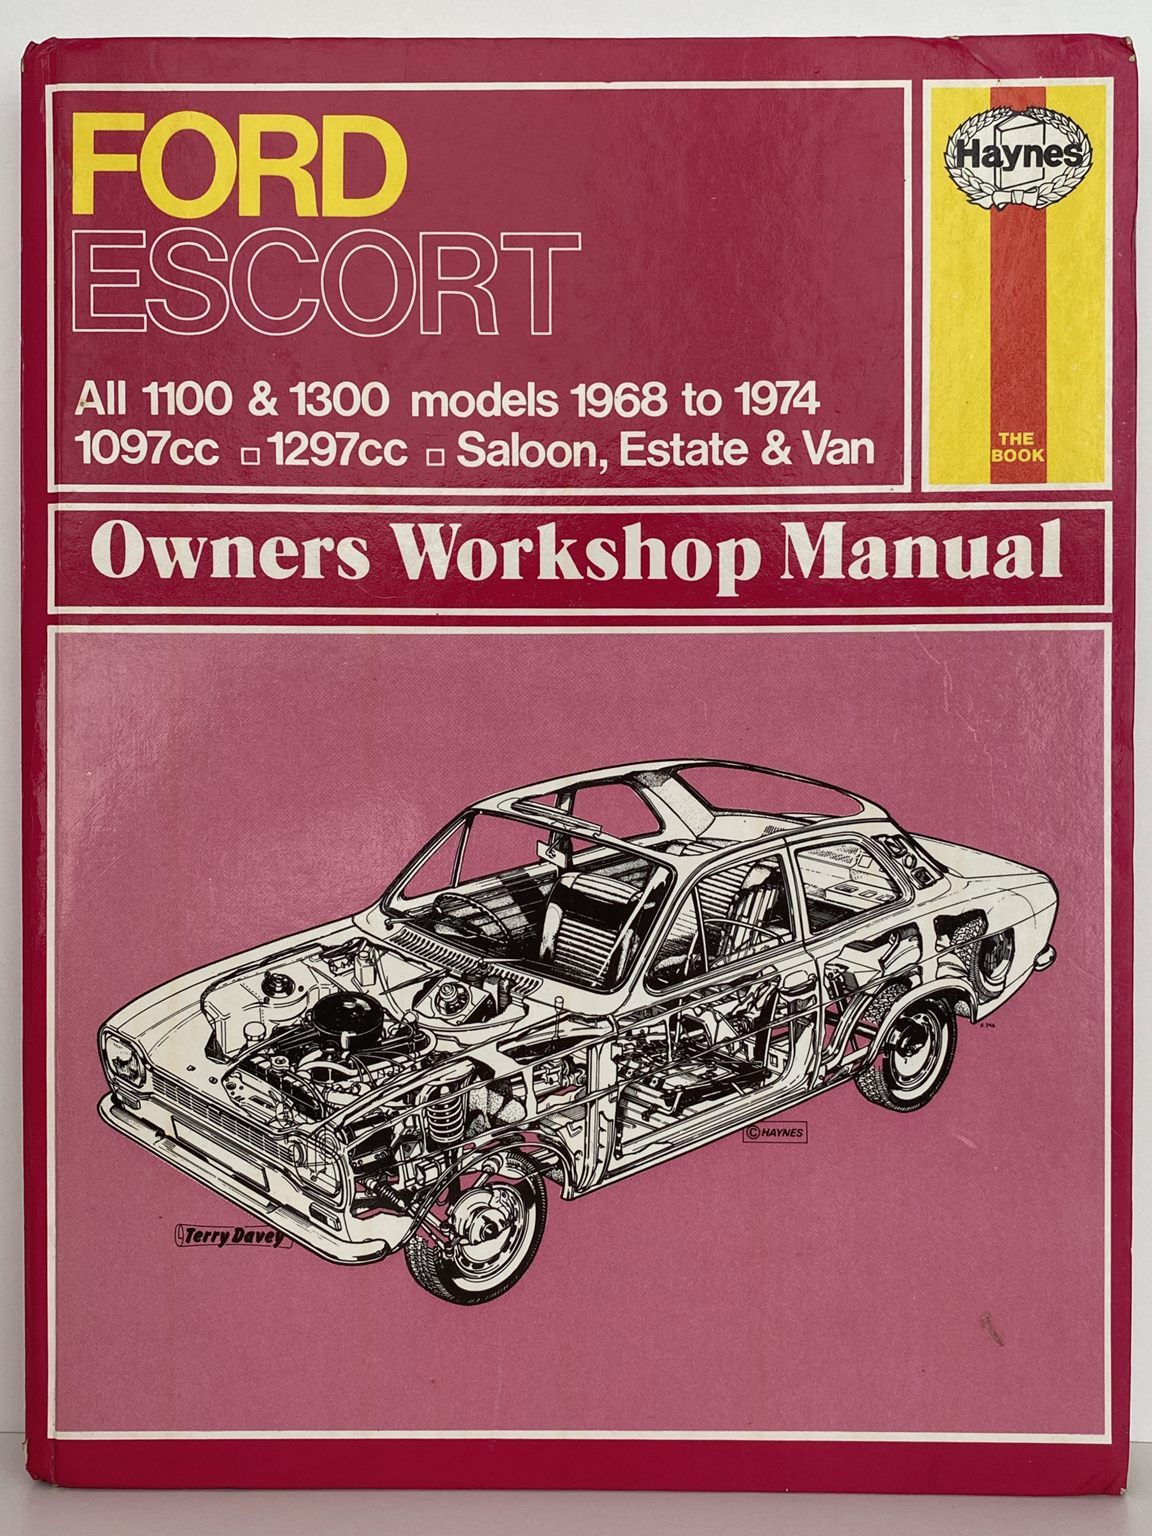 FORD ESCORT Owners Workshop Manual - all 1100 and 1300 models 1968 to 1974